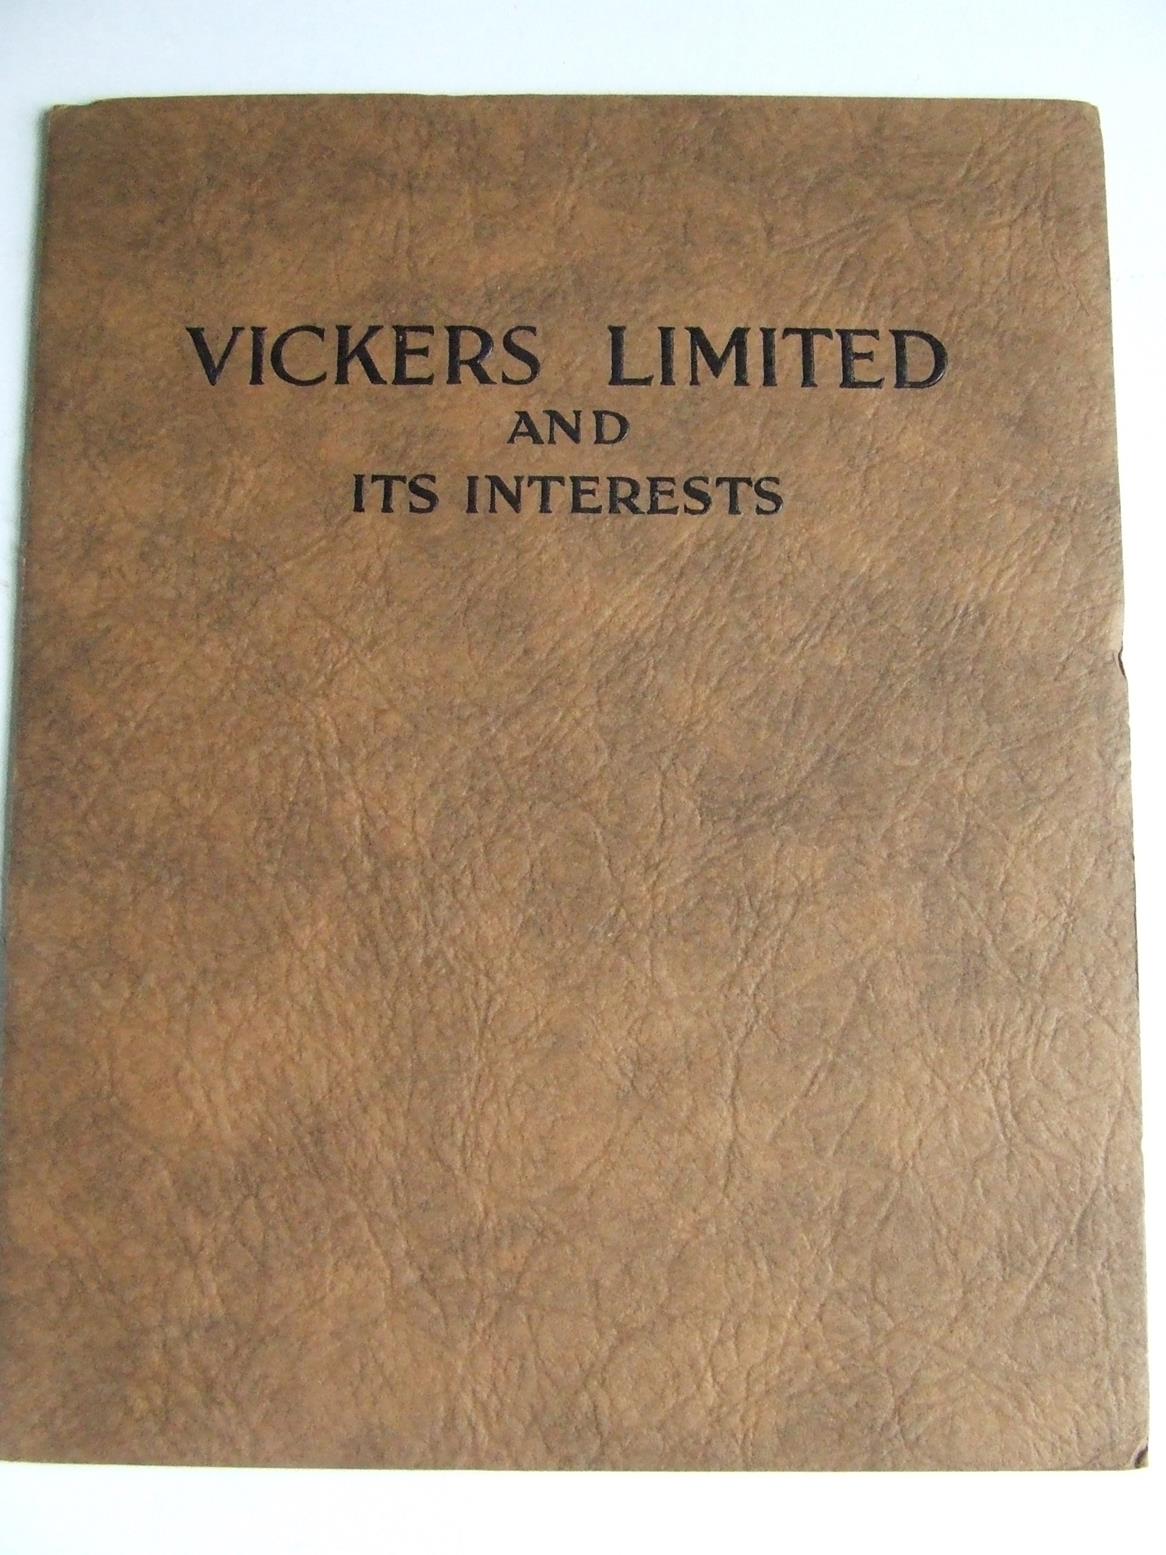 Vickers Limited & Its Interests